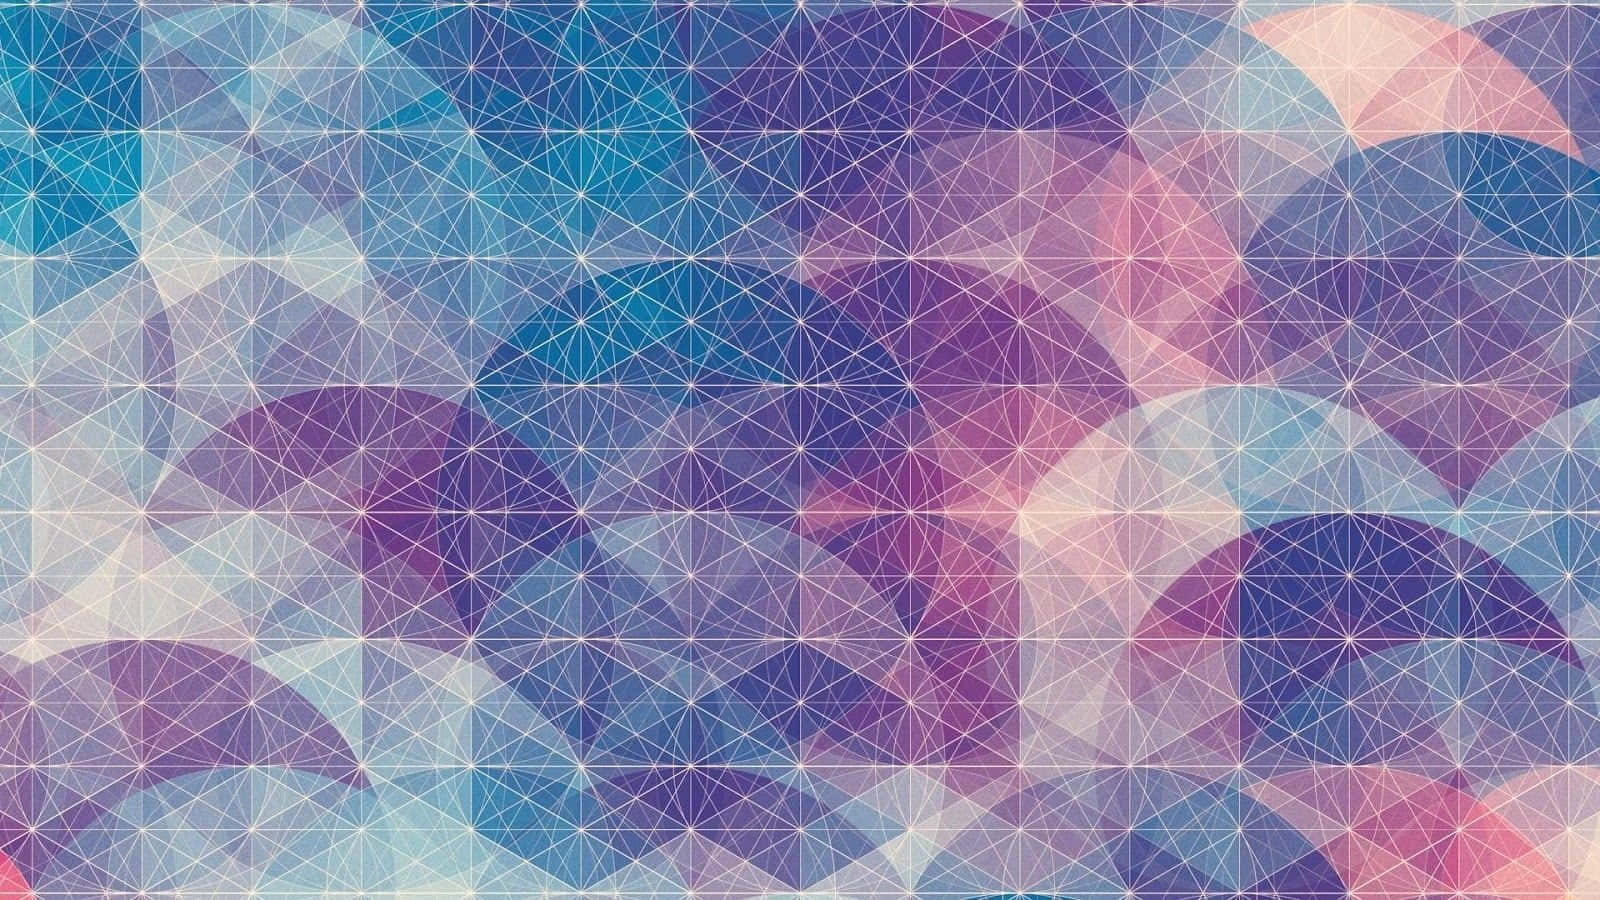 Geometric Shapes in an Abstract Background